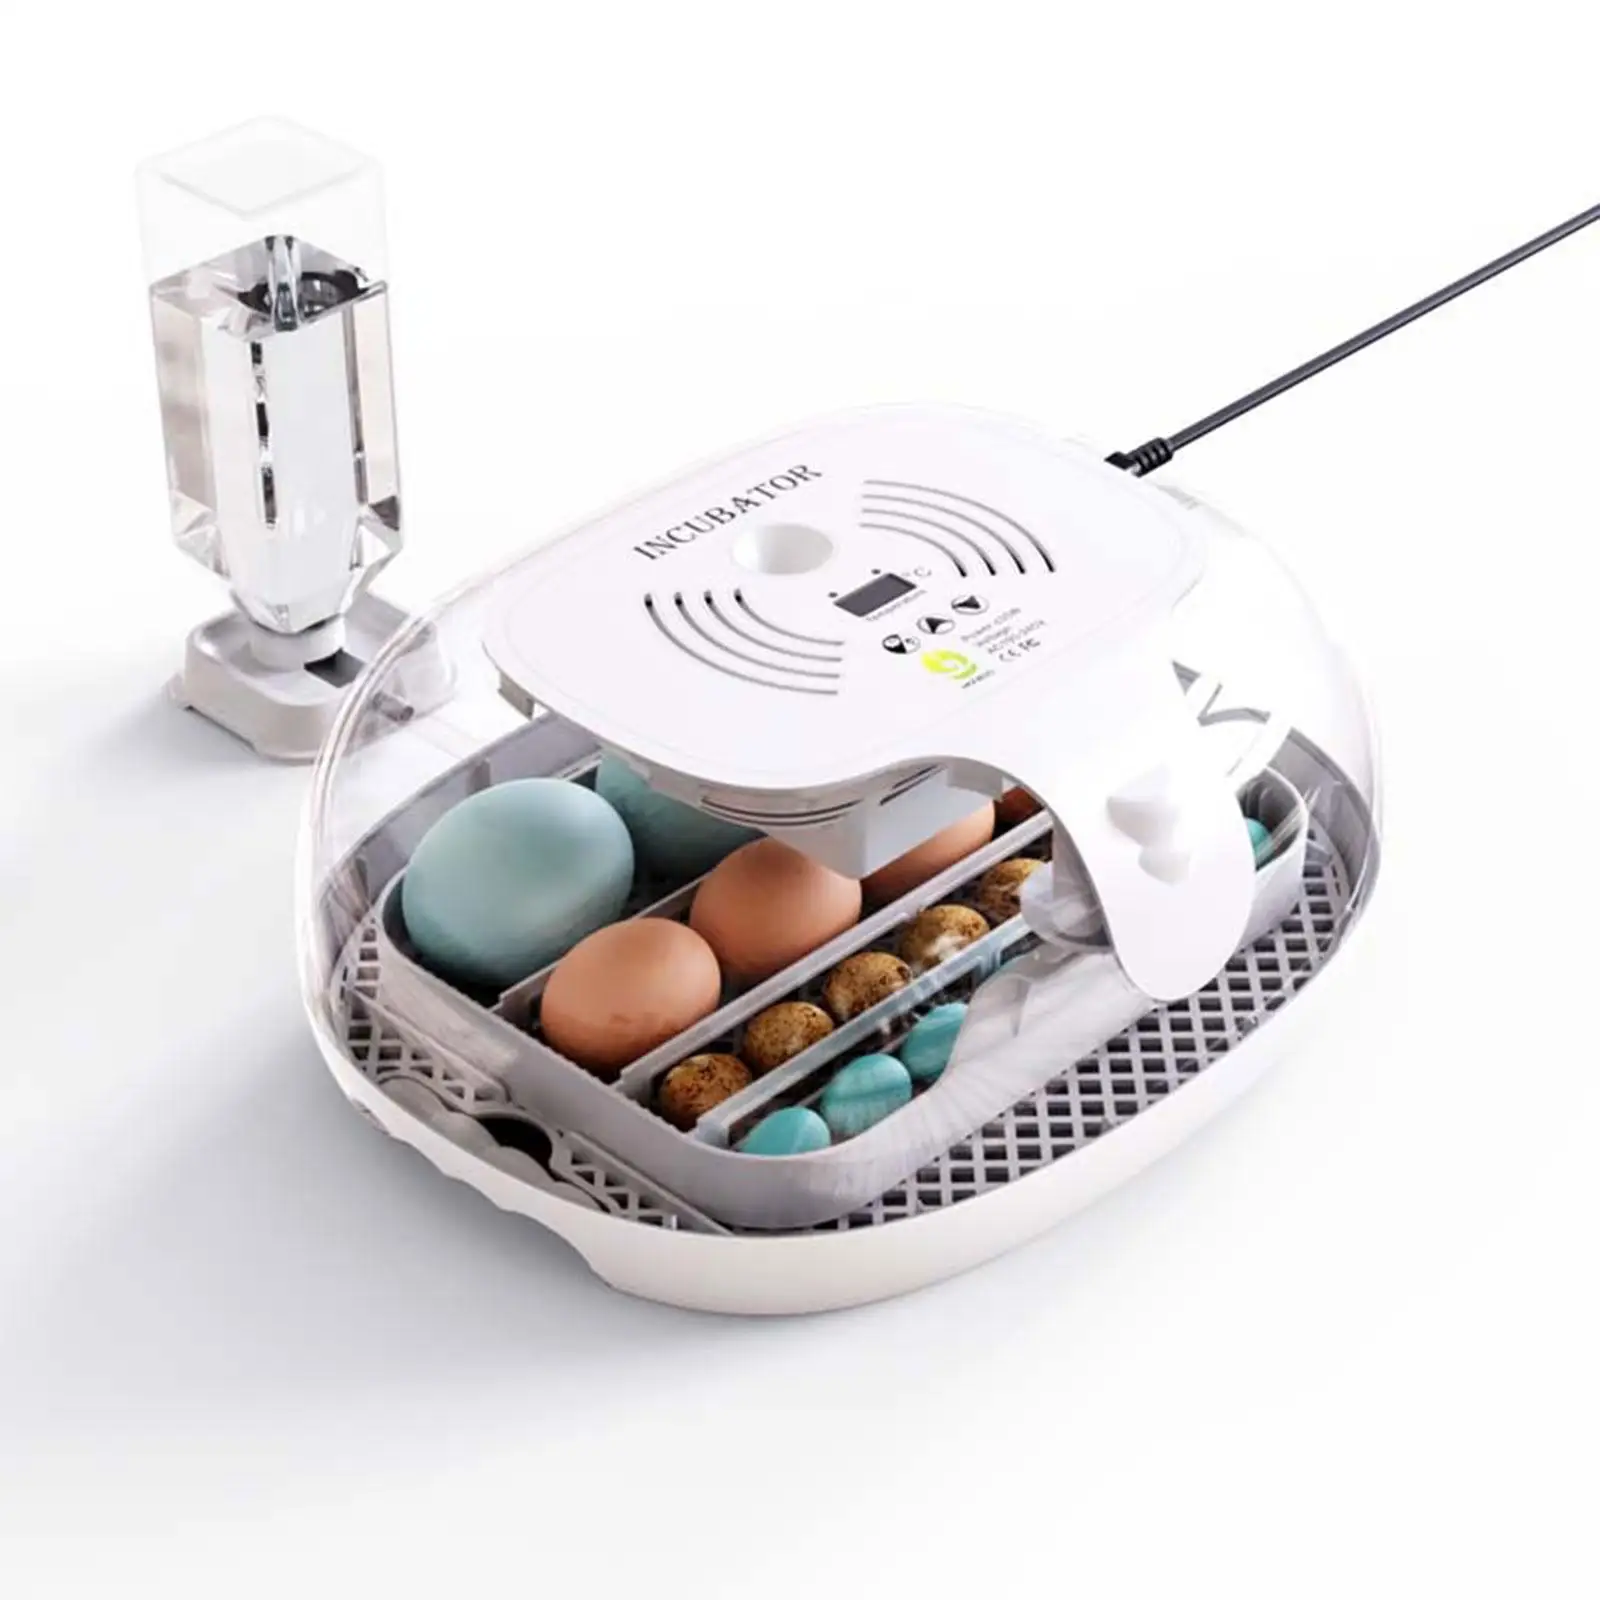 Portable Digital Automatic Egg Incubator 360 Turning Clear Top Cover Small Poultry Hatcher for Hatching Turkey Eggs Quail Duck